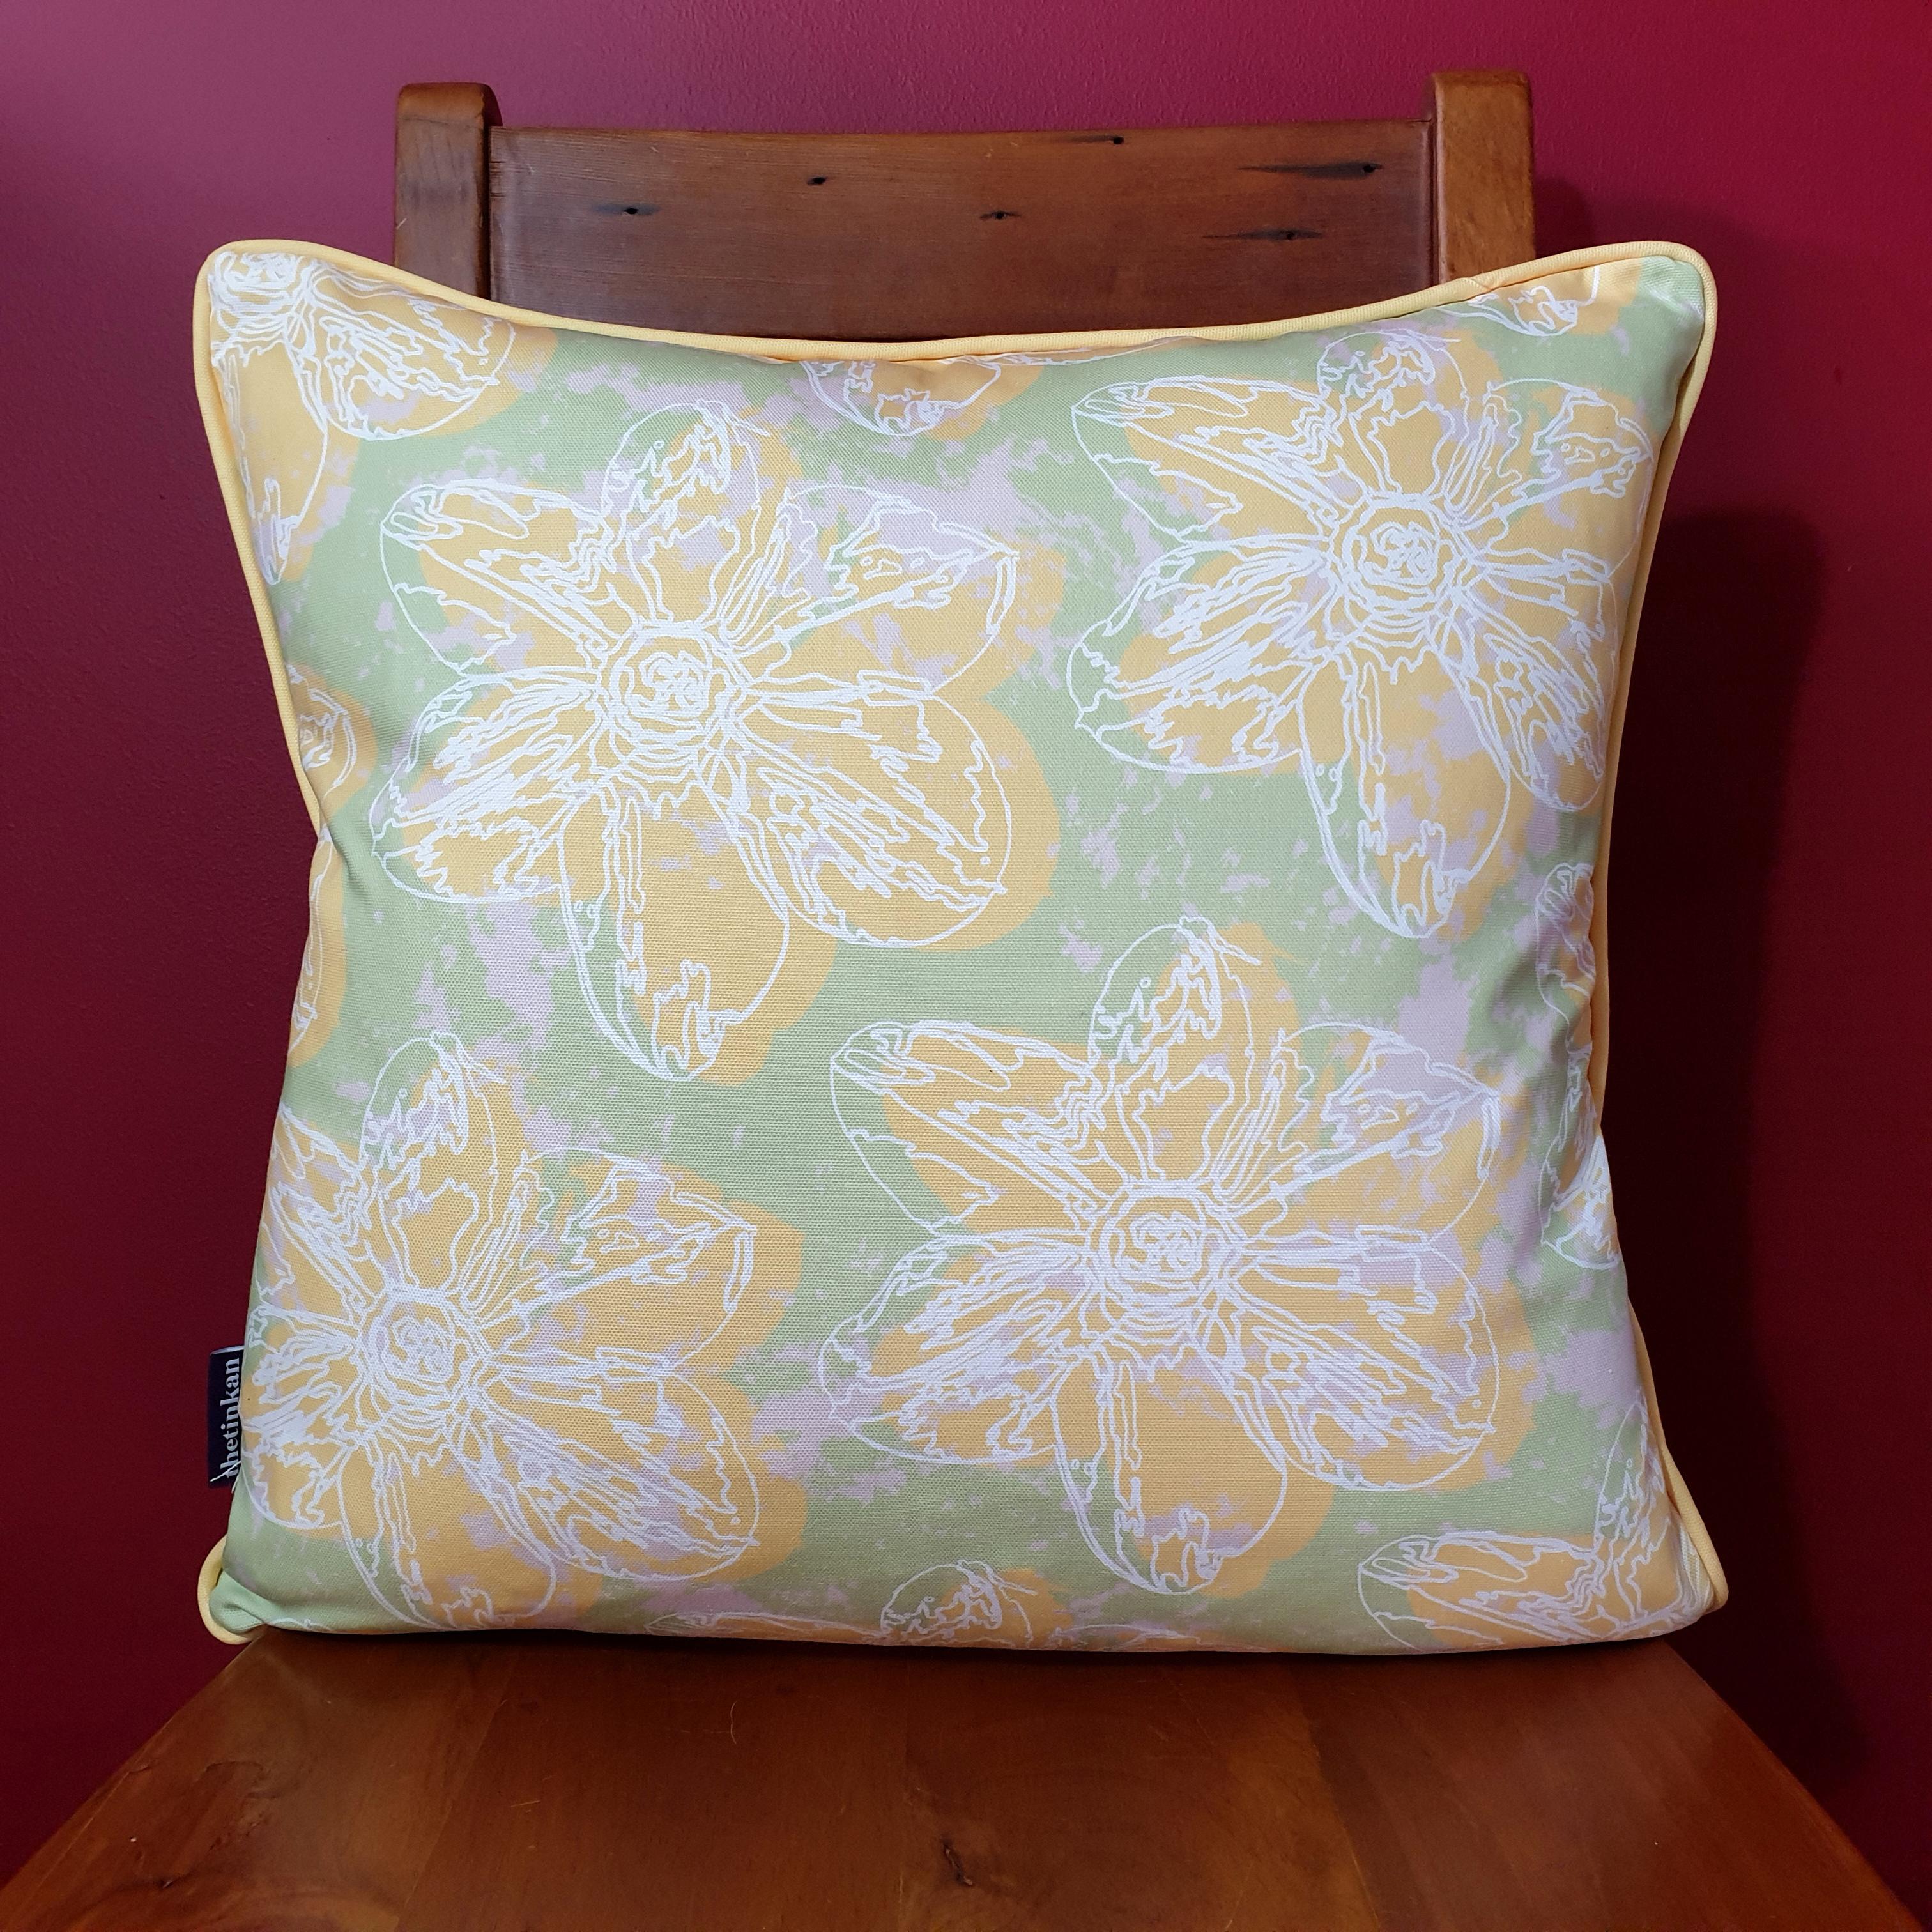 Double-sided 51cm square Flower Splash cushion designed by thetinkan. Yellow narcissus flower and yellow piping with white traced outline set within a mint green background with pale pink paint splashes. Available with an optional luxury cushion inner pad. VIEW PRODUCT >>